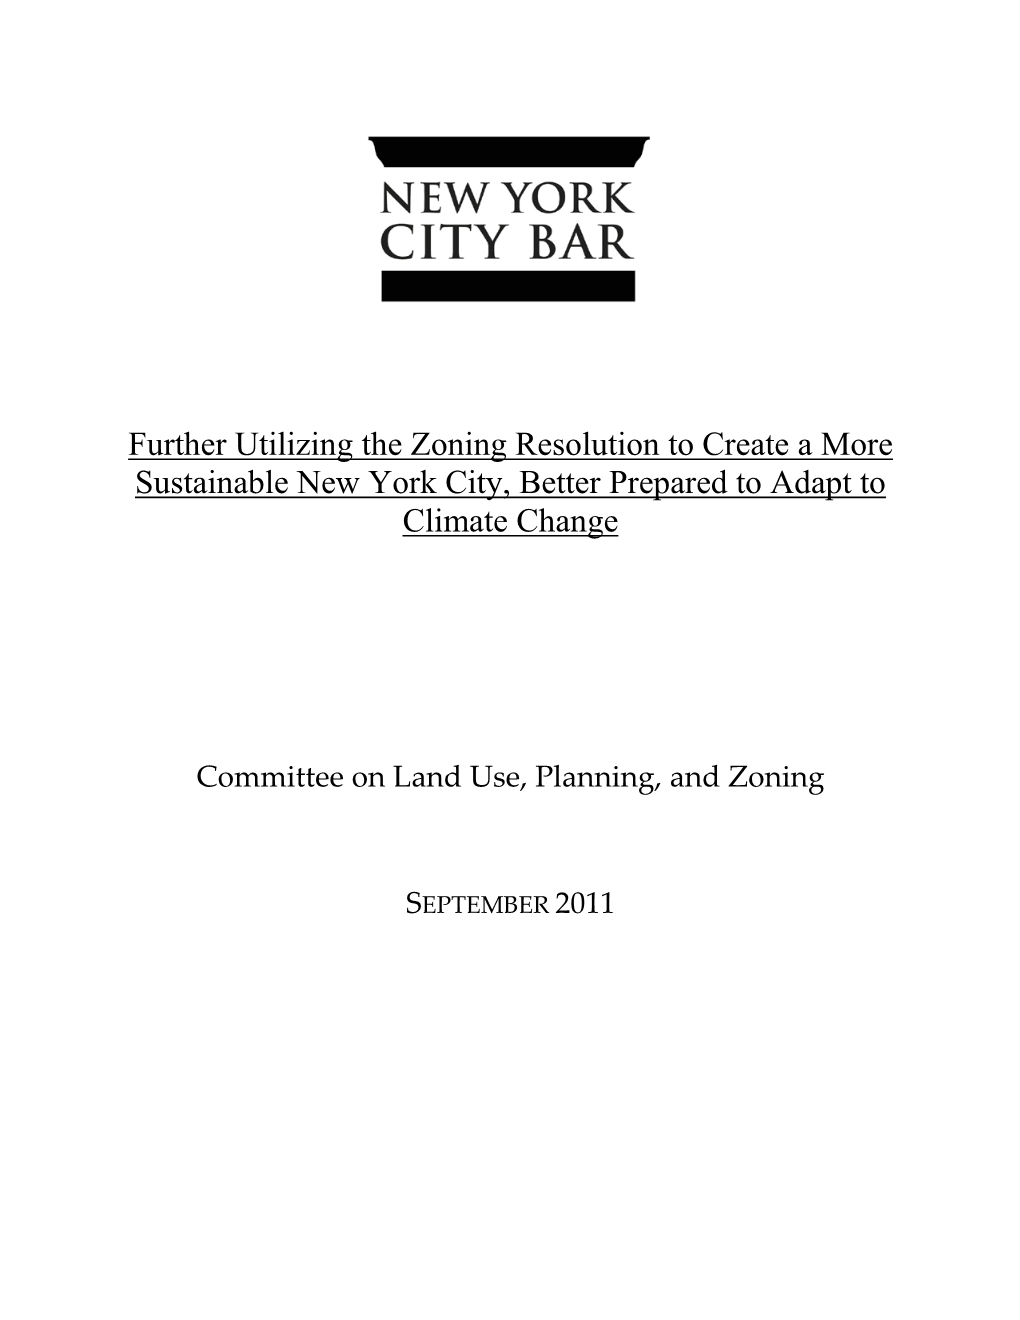 Further Utilizing the Zoning Resolution to Create a More Sustainable New York City, Better Prepared to Adapt to Climate Change